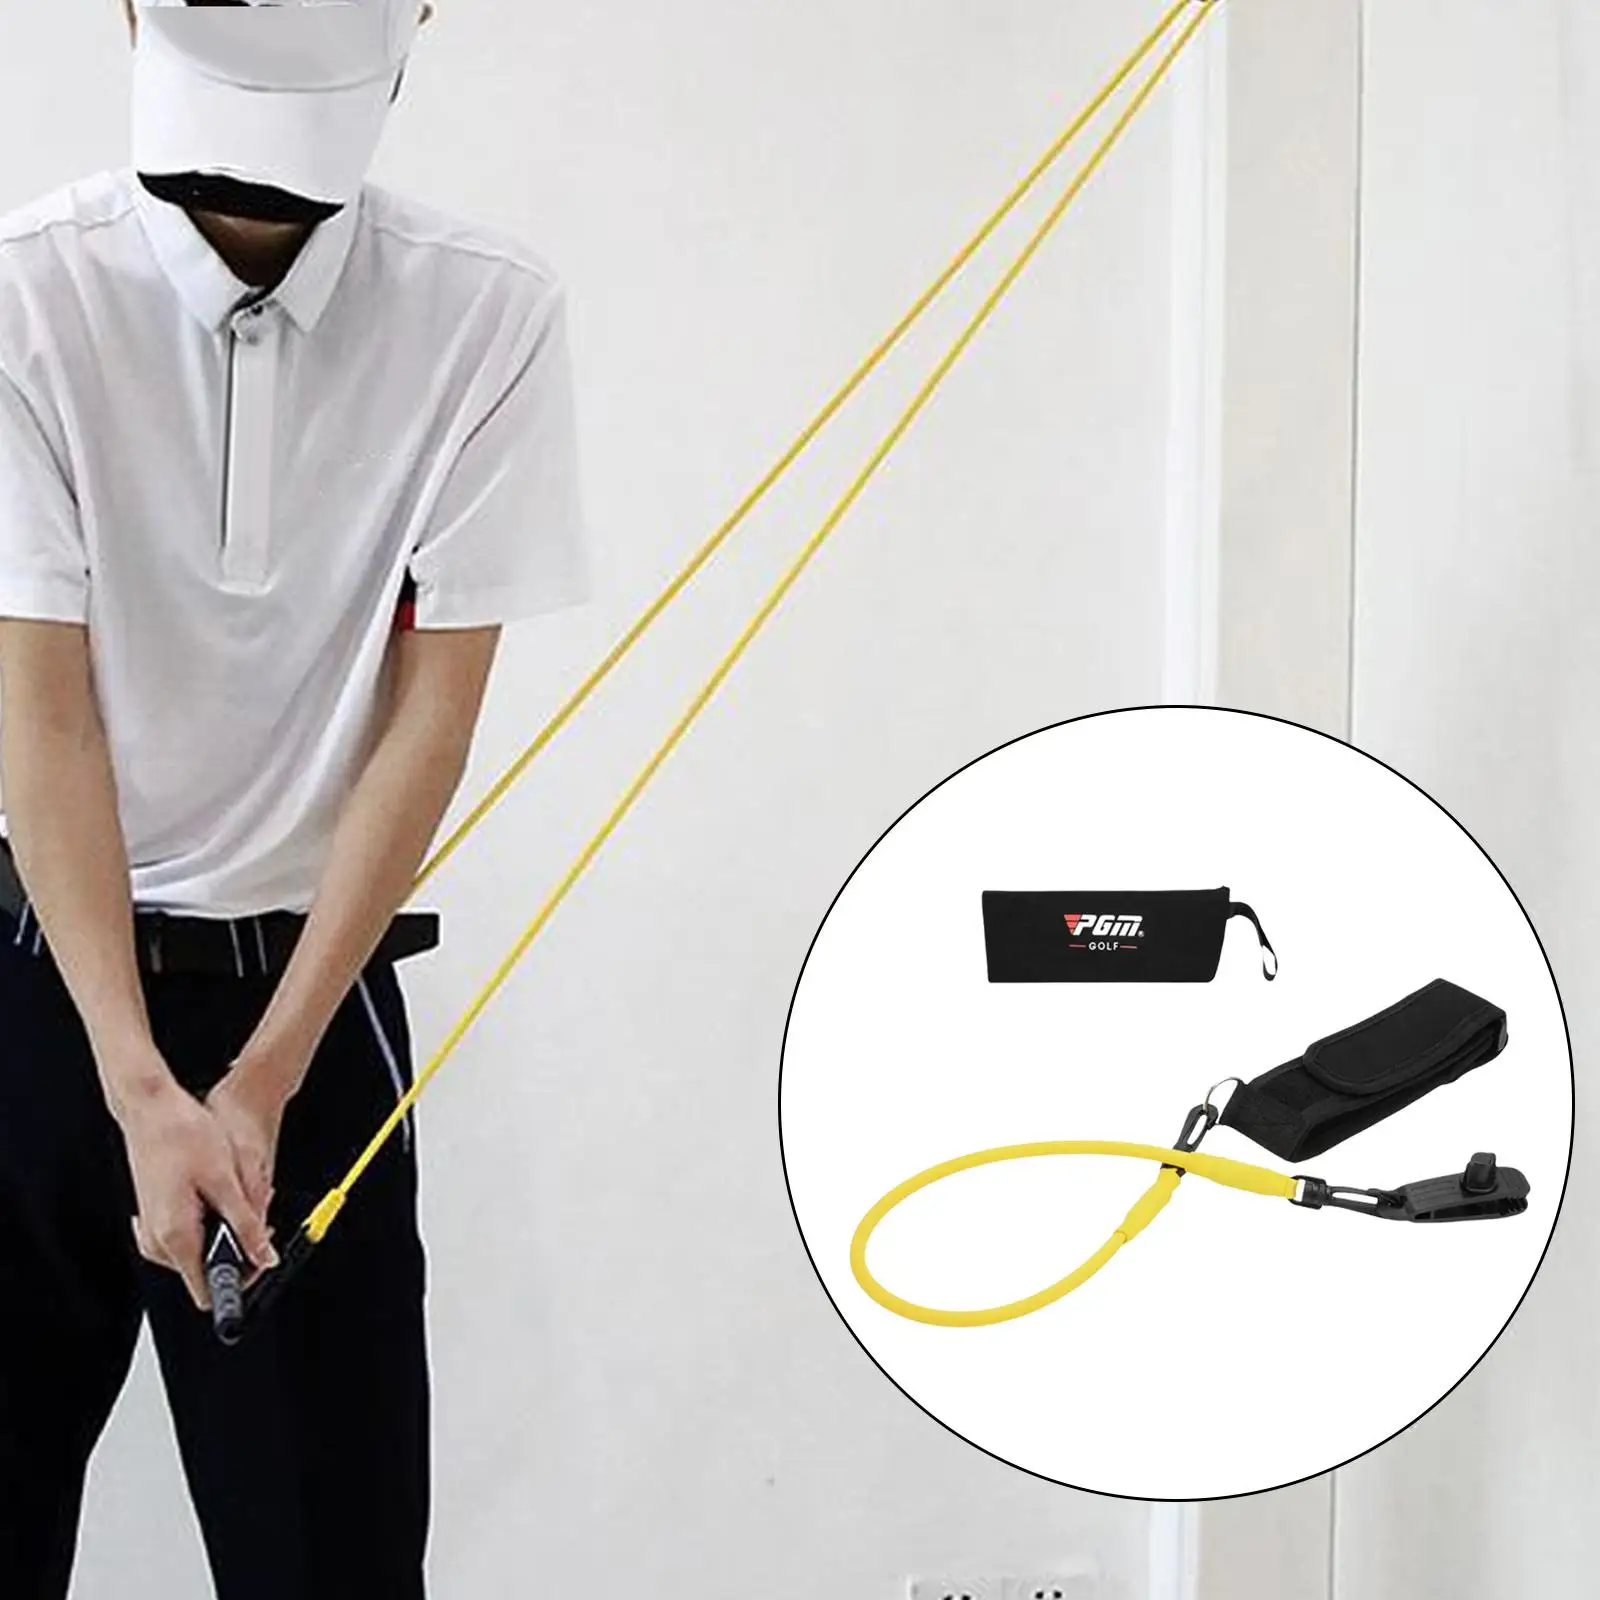 Training Correcting Practicing Aid Arm Golf Swing Trainer Belt for Beginner